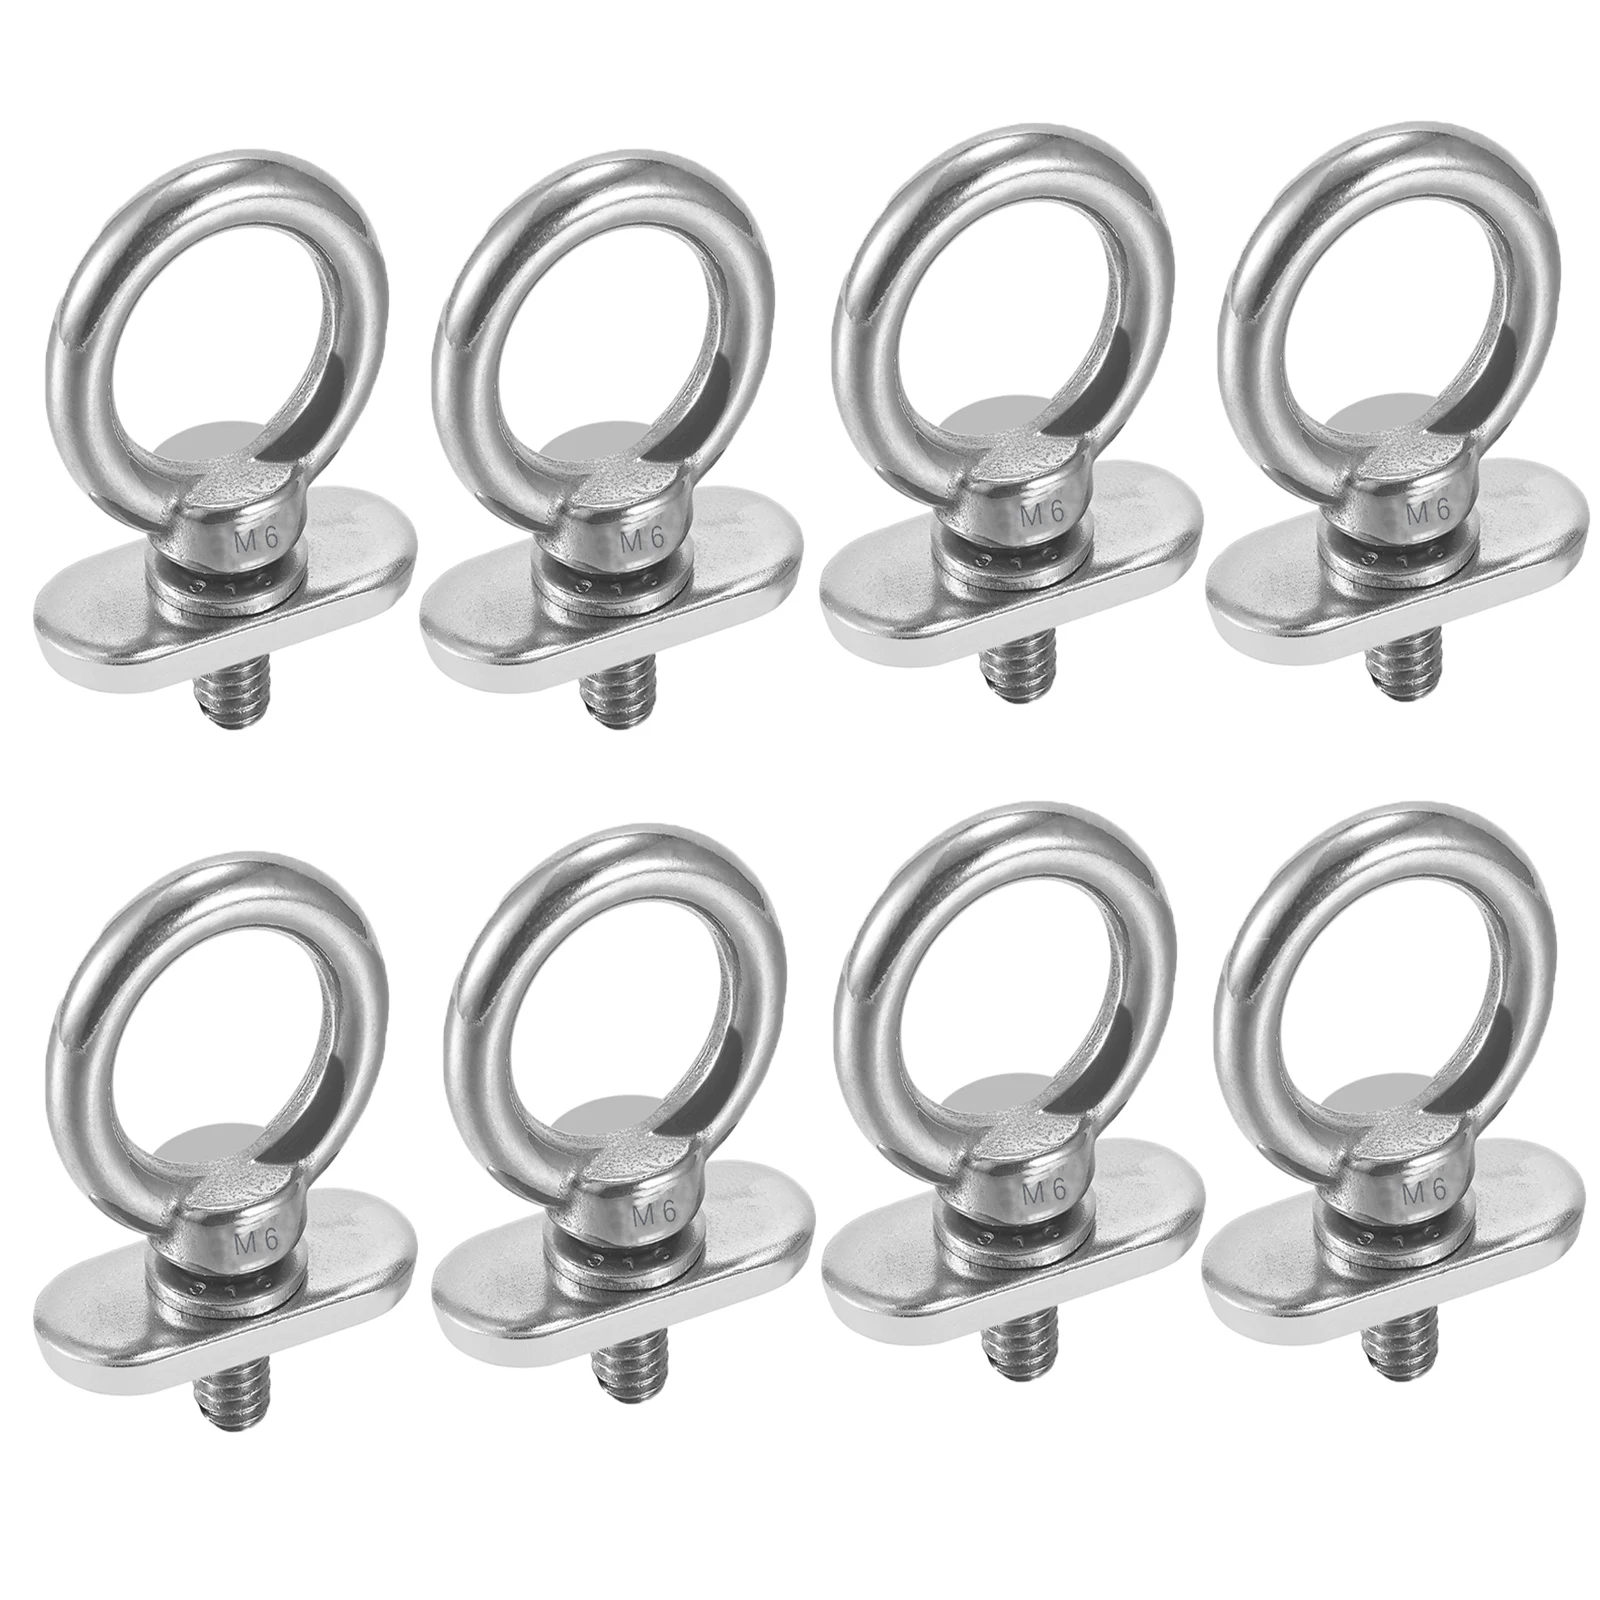 Track Mount Tie Down Eyelets, M6 Bolt (8 Packs), 316 Stainless Steel, Kayak Track Accessories 2pc kayak ram mount track mounting base track gear attachment adapter track mount for canoe fishing rod accessories